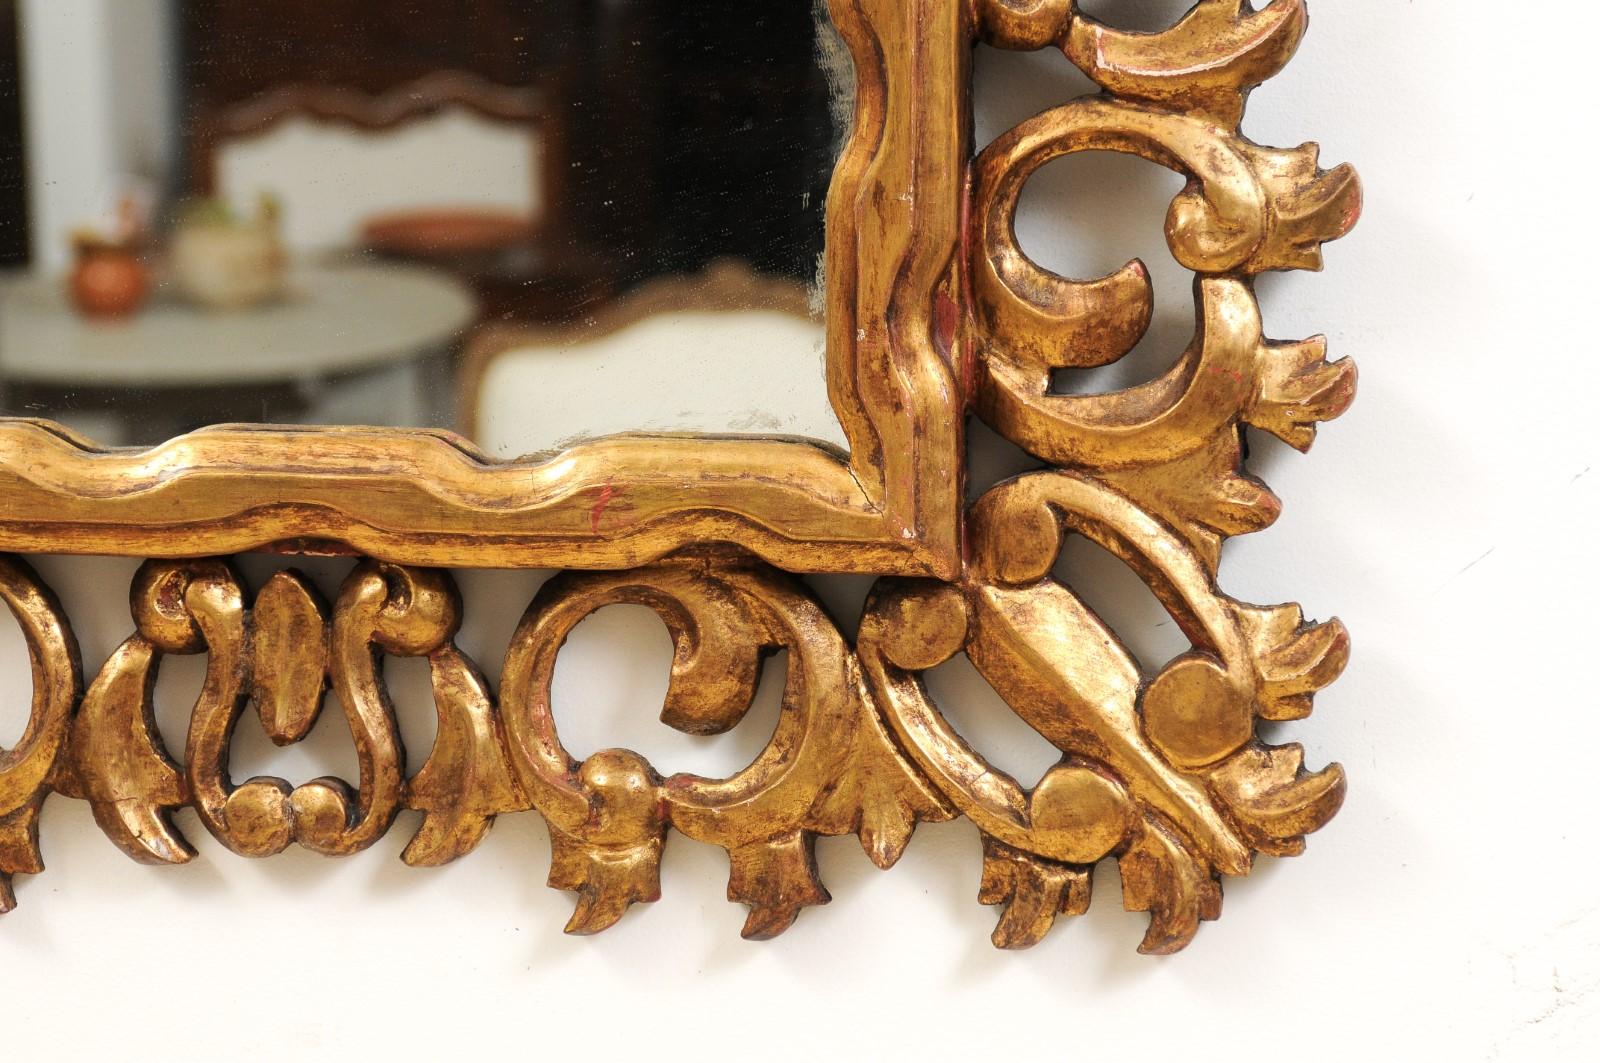 Florentine 20th Century Carved Giltwood Mirror with C-Scrolls and Foliage Motifs For Sale 1